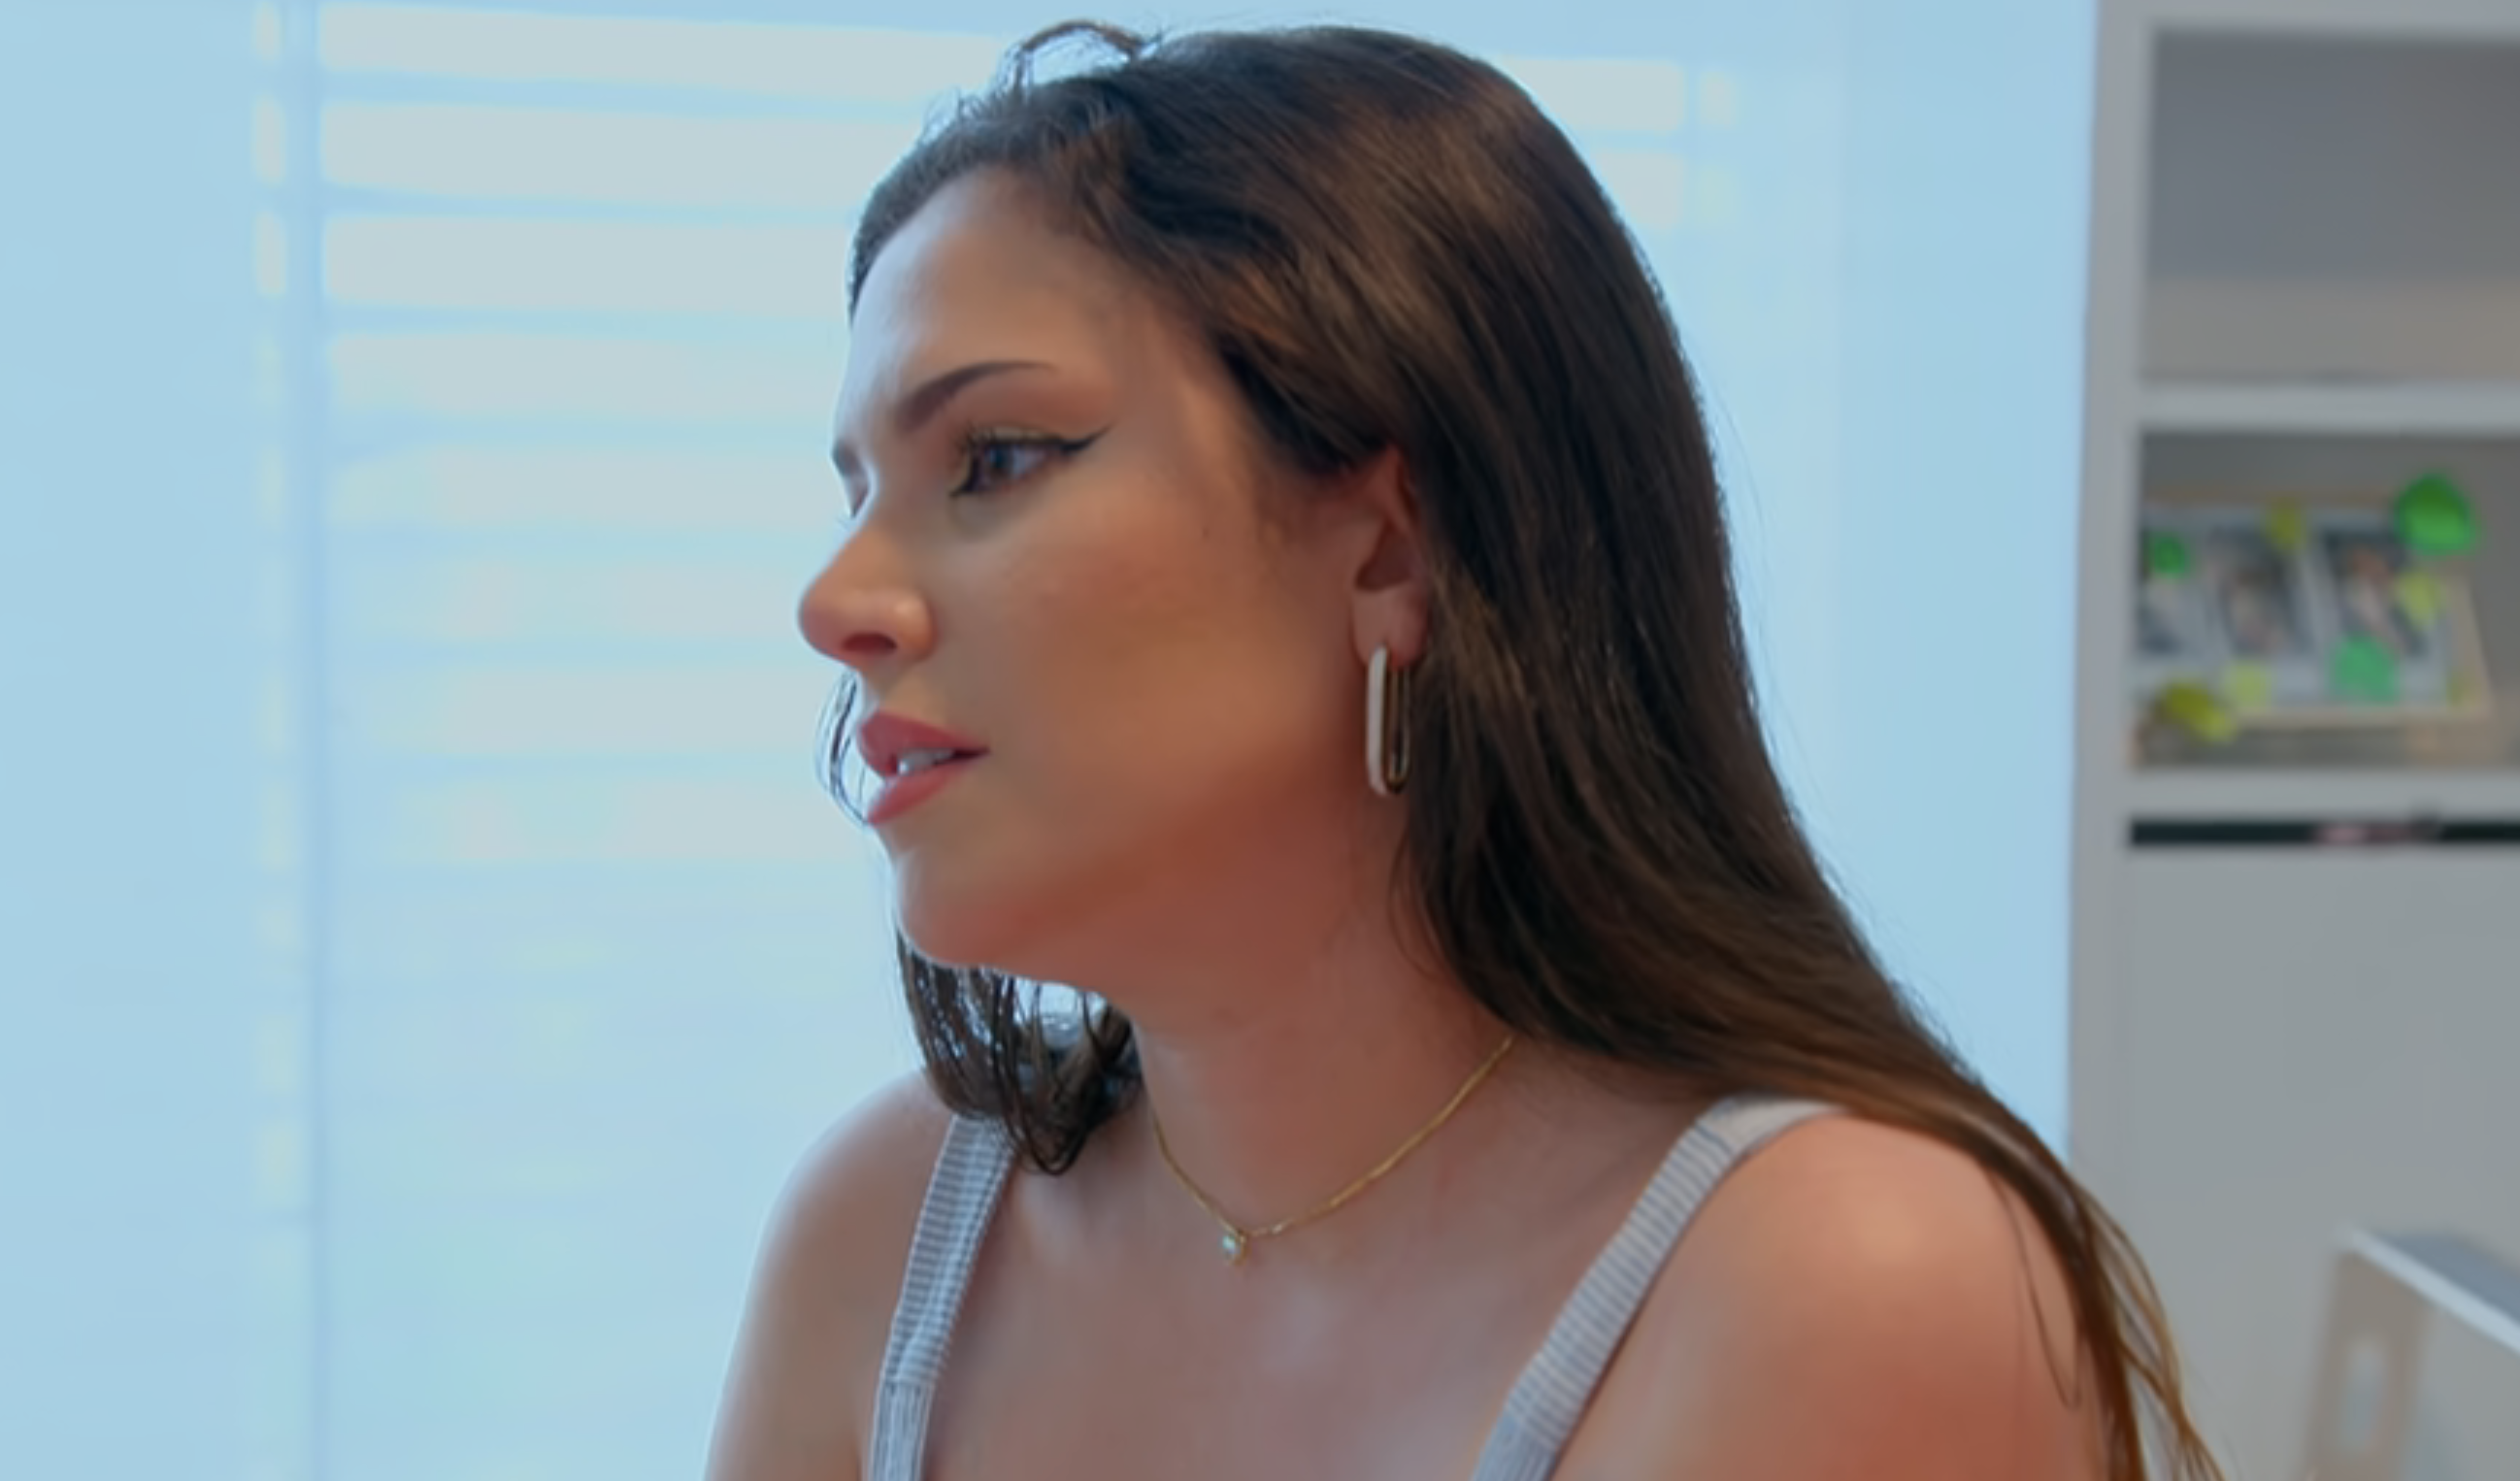 Amy in a sleeveless top with hoop earrings, sitting indoors, looking to the side, with a thoughtful expression